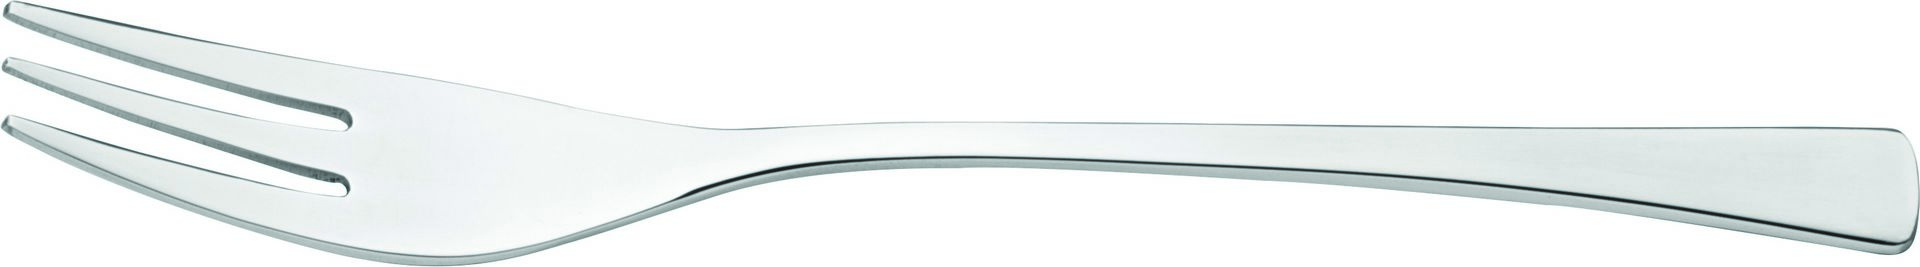 Curve Cake Fork - F38011-000000-B01012 (Pack of 12)